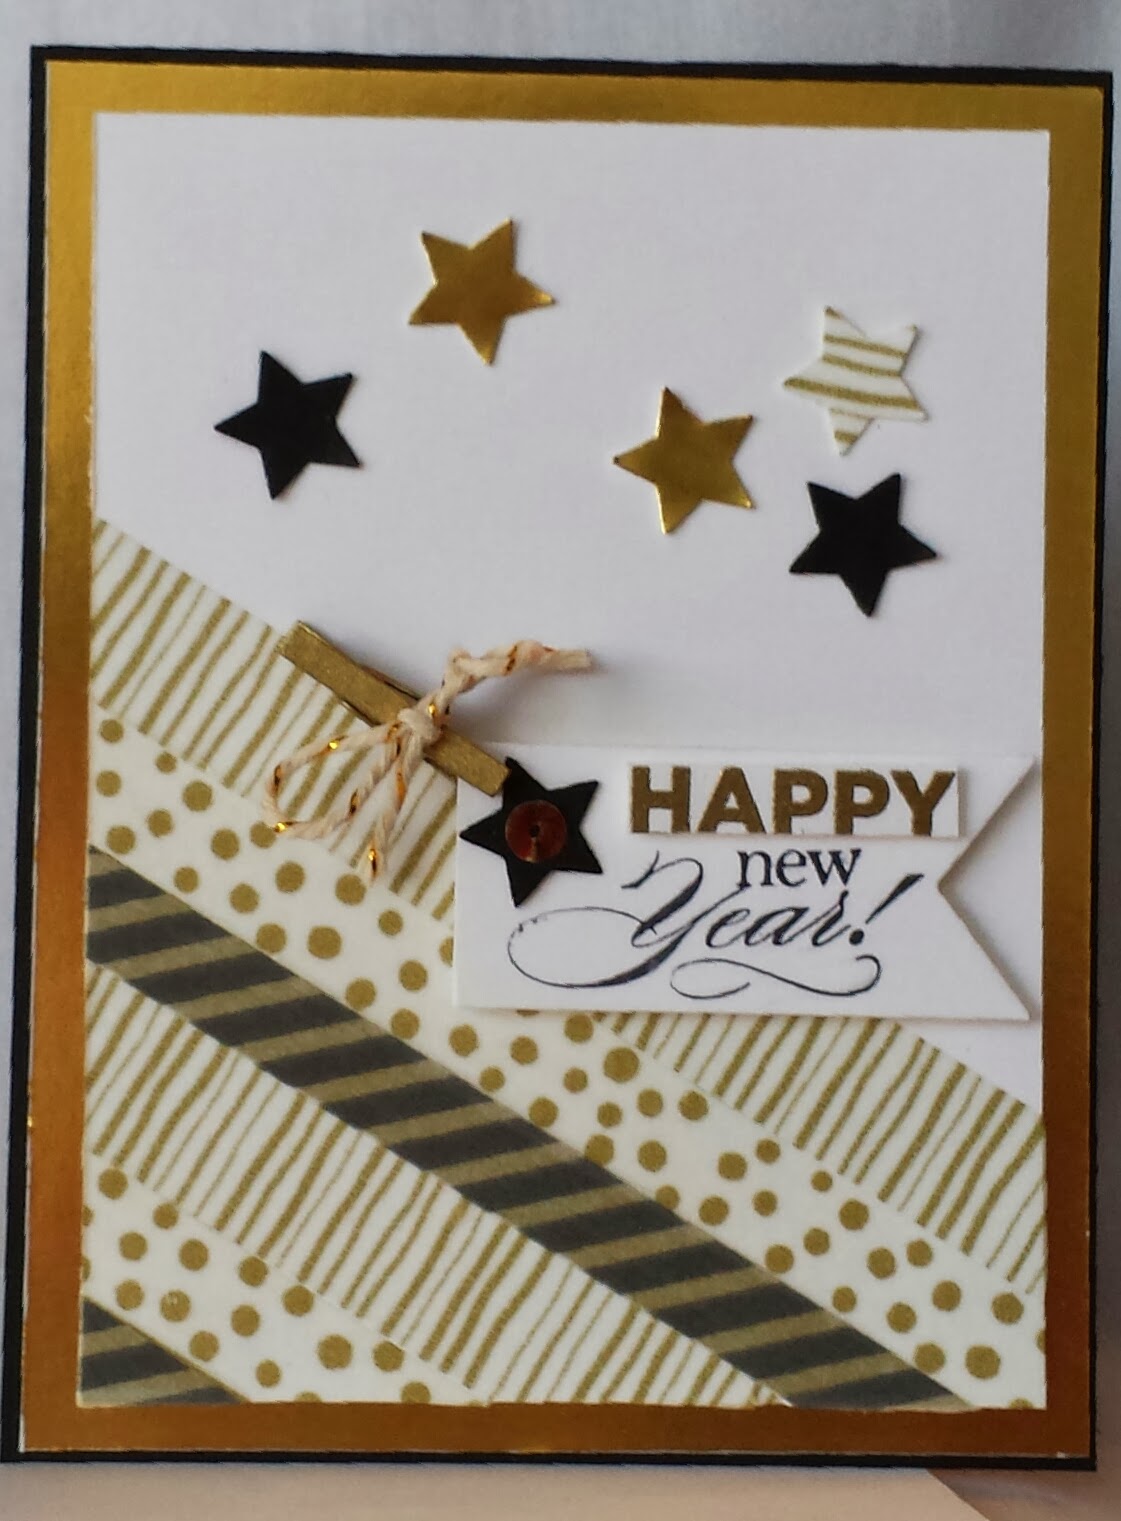 papermadeprettier: HAPPY NEW YEAR from Papermadeprettier, sparkly gold ...